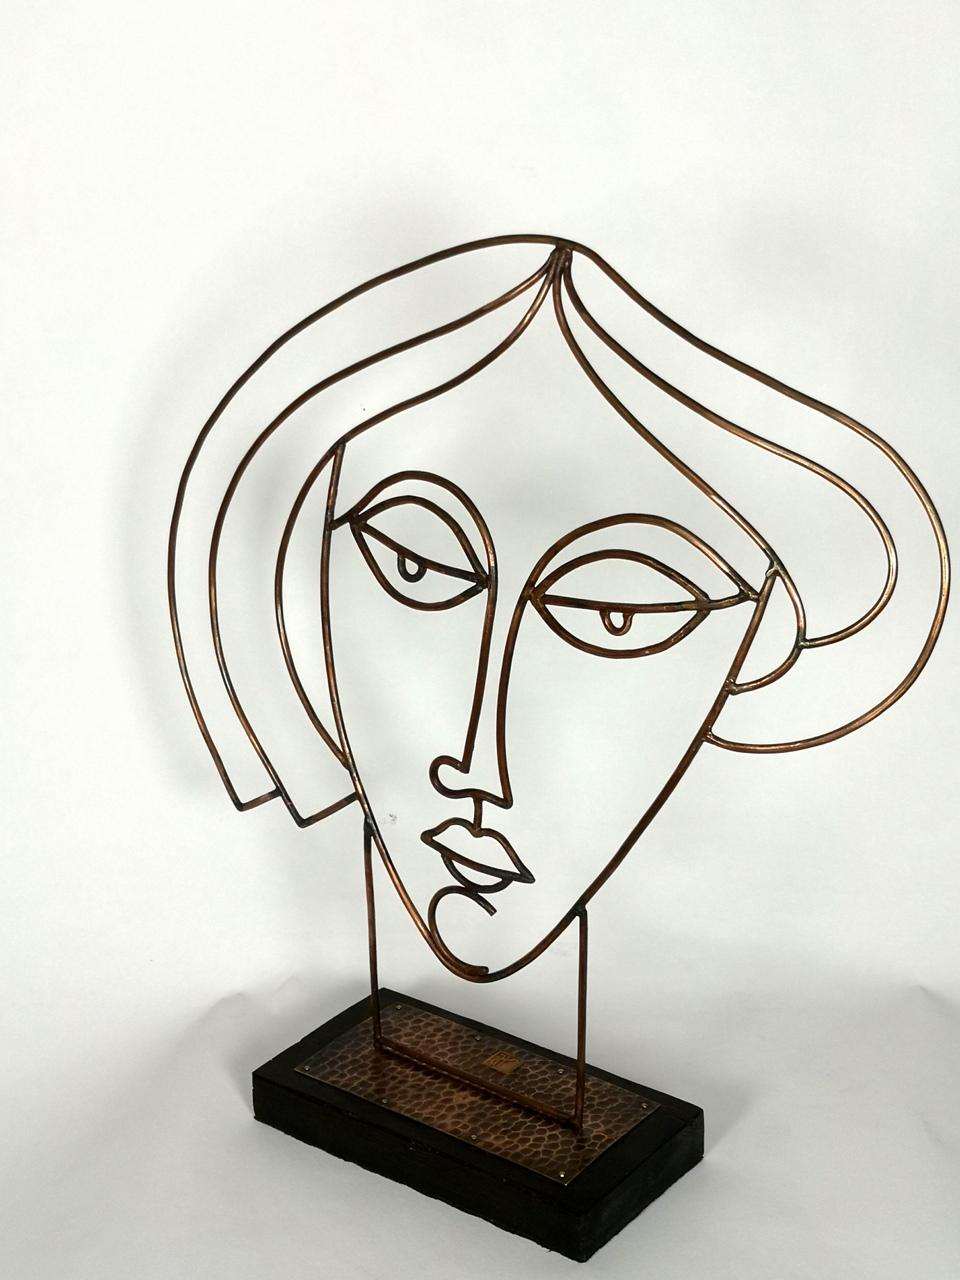 Sophisticated and elegant copper women head sculpture by the Hungarian metalsmith Laszlo Pal Horvath, from the late 20th century.
The distressed wooden base is a part of the piece. It's in excellent condition. Stamped by the artist 